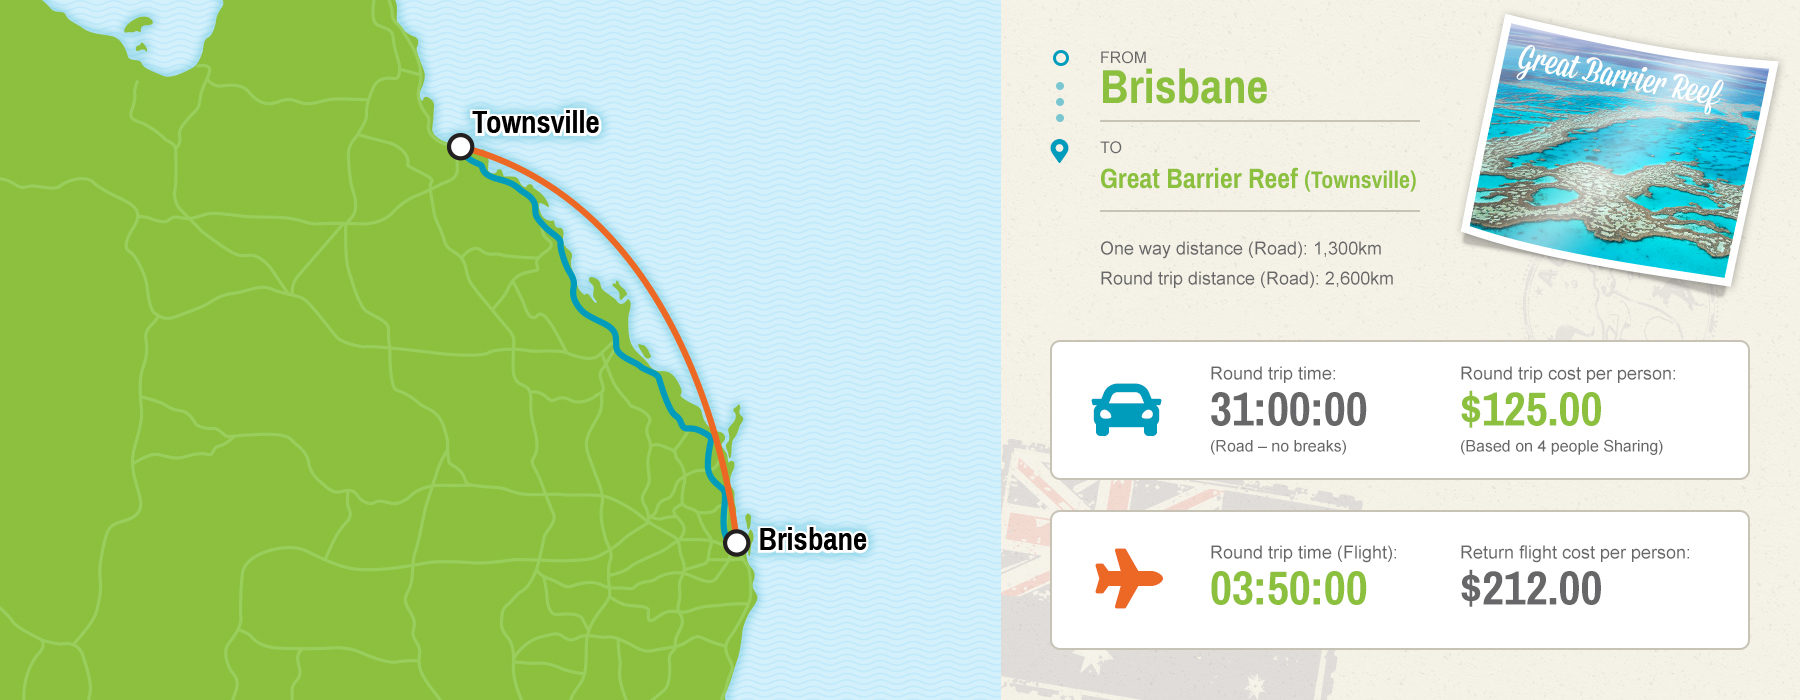 Brisbane to Great Barrier Reef map showing driving vs flying